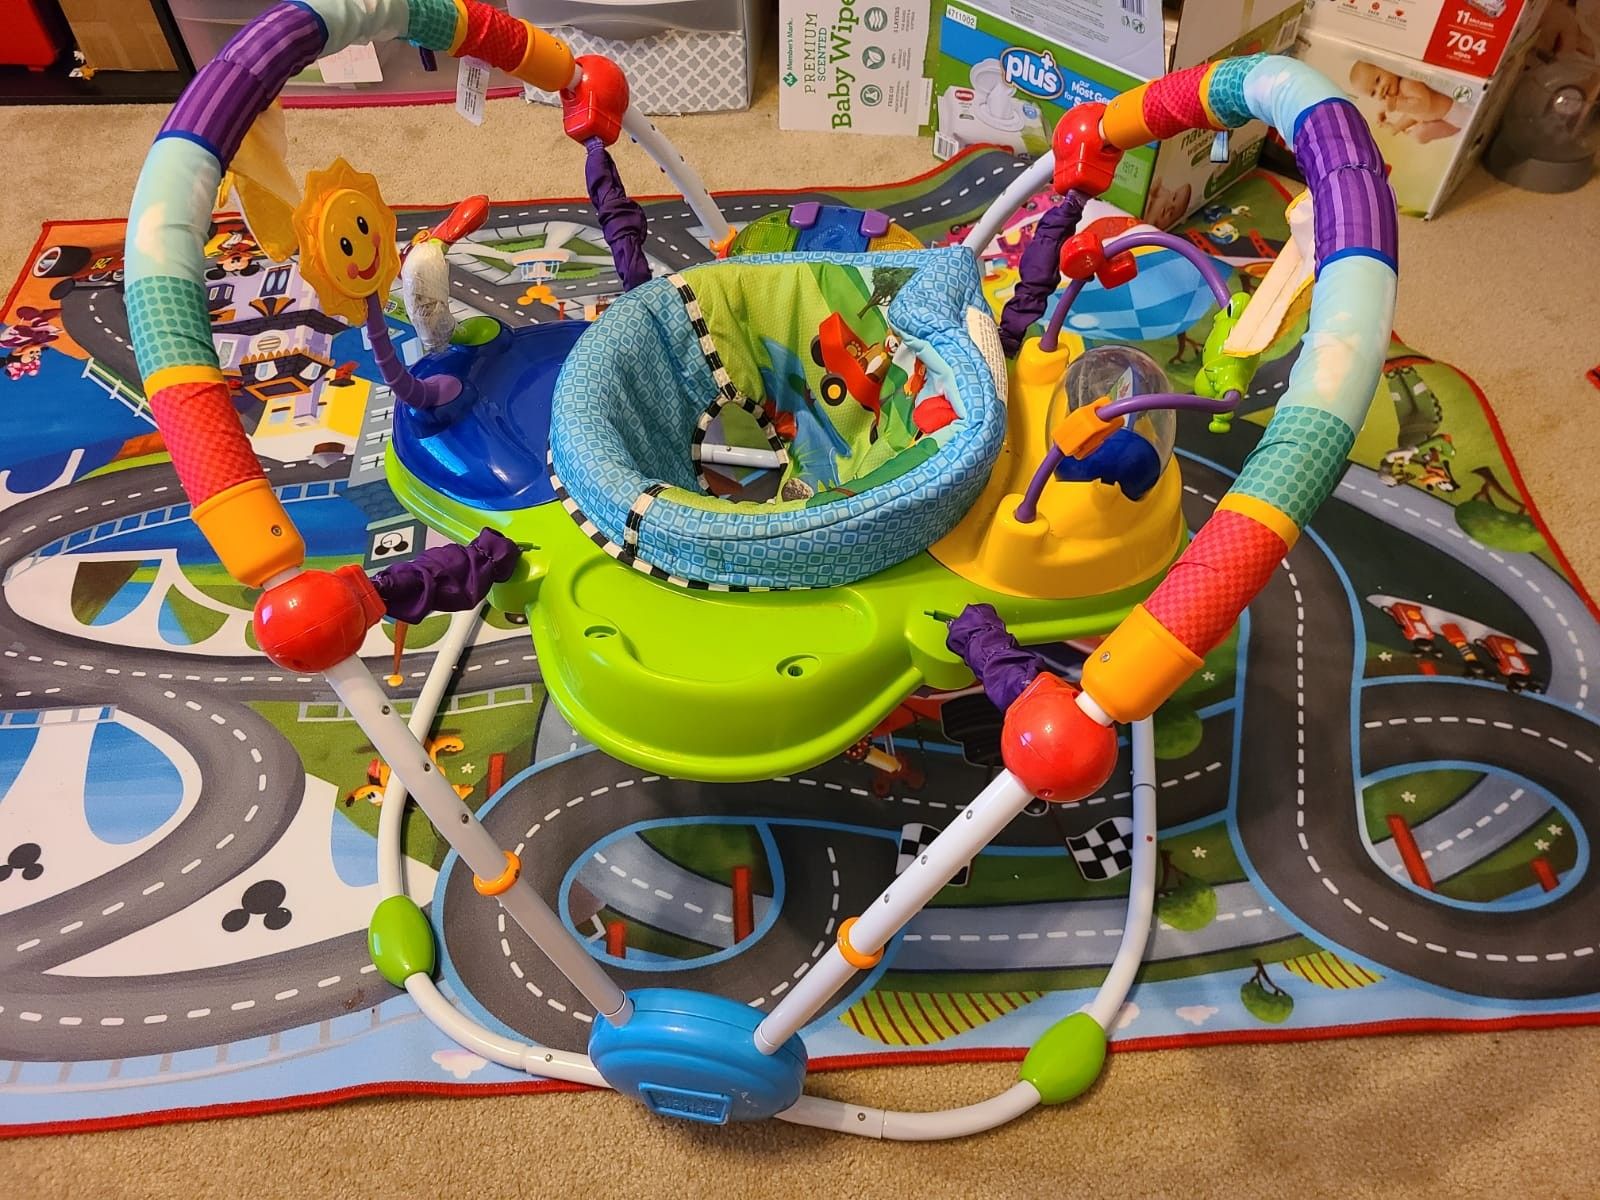 Clean kids toys and gadgets